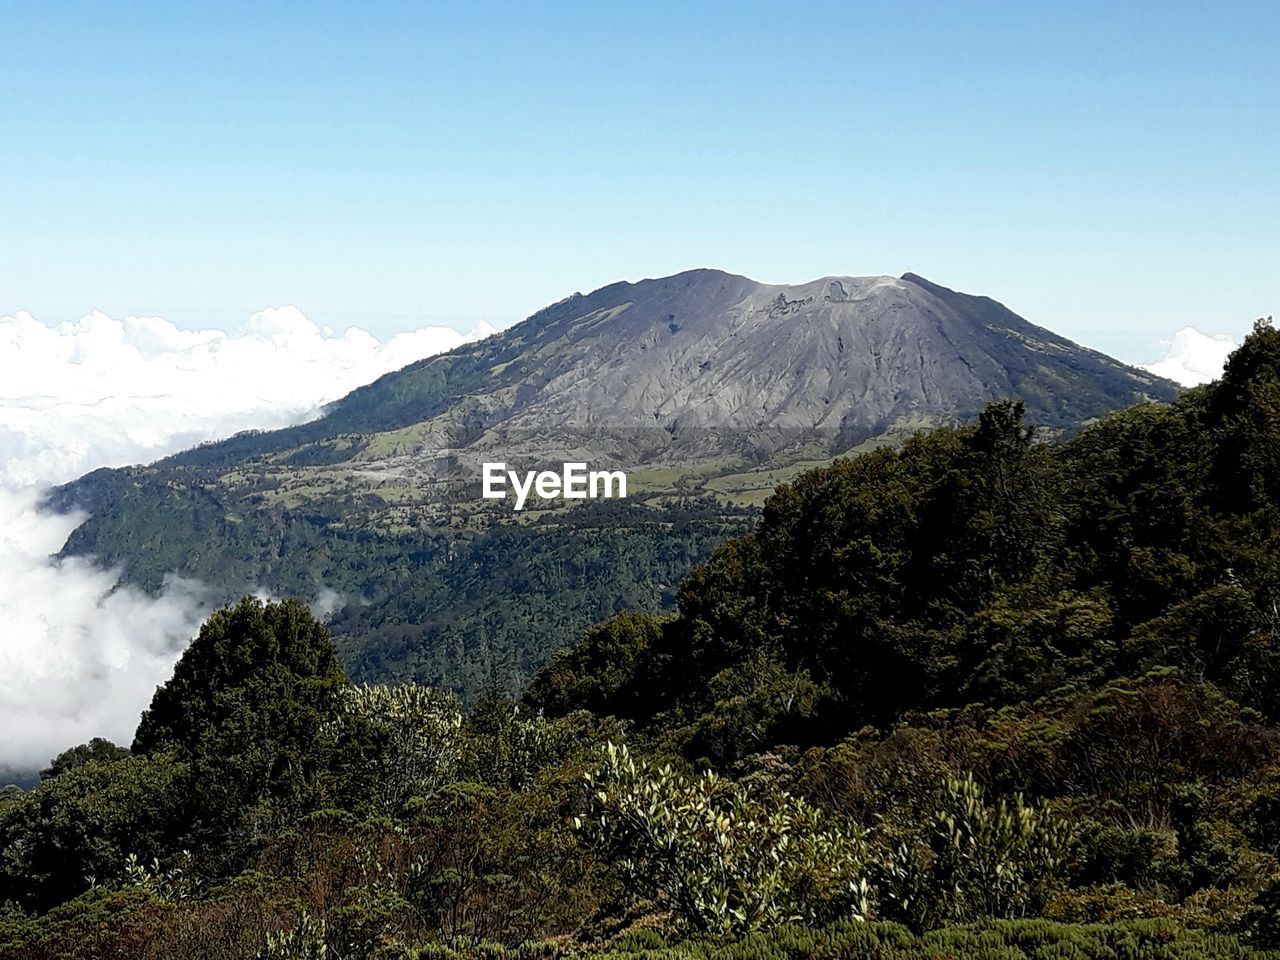 SCENIC VIEW OF VOLCANIC MOUNTAIN AGAINST SKY